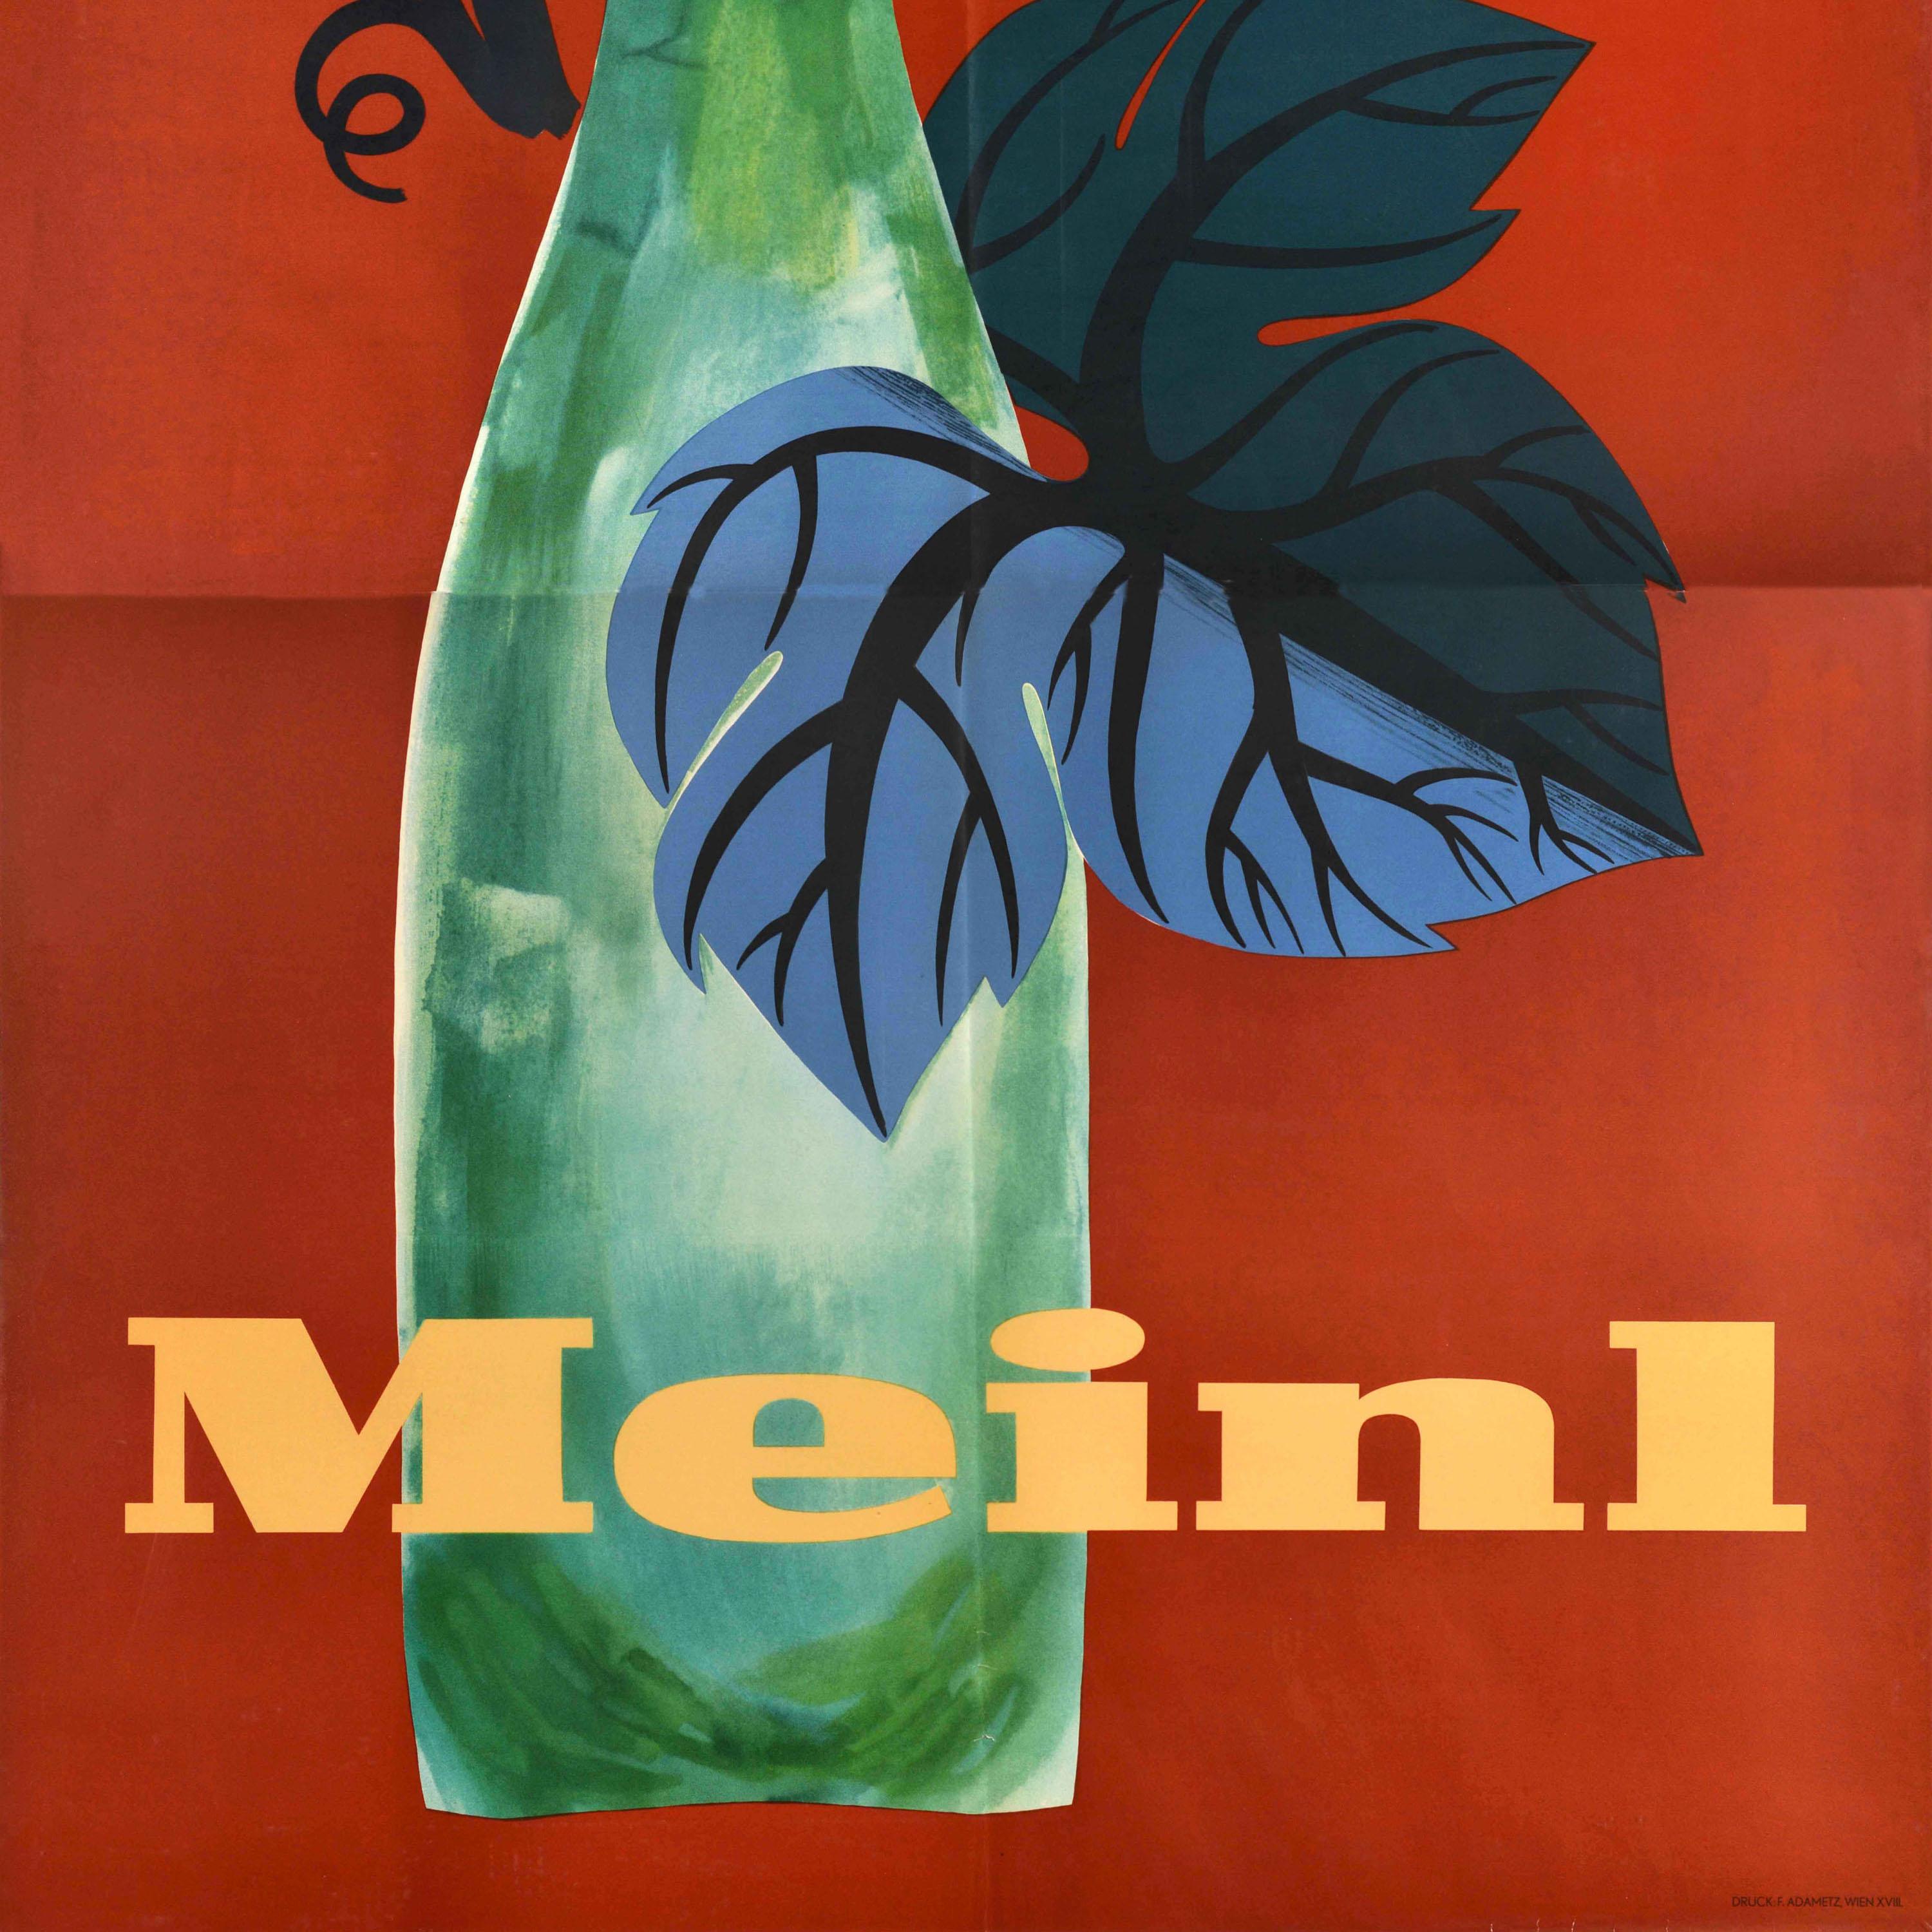 Original vintage drink advertising poster for Meinl featuring an image of a green wine bottle with a grape leaf set on a red background. Julius Meinl opened in 1862; by 1913 the company was the largest importer of tea and coffee in Central Europe;